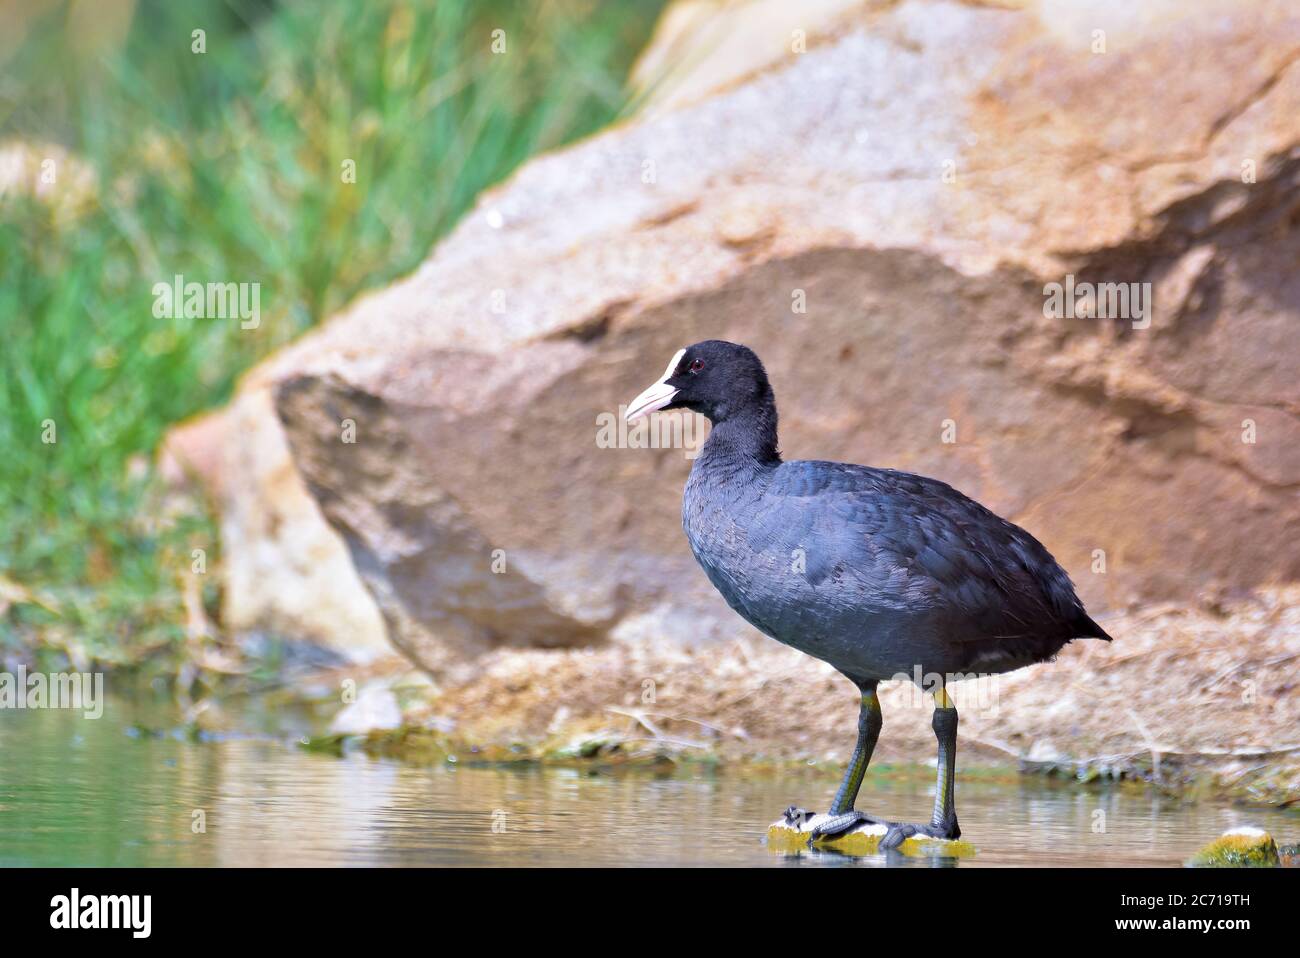 The Eurasian coot, also known as the common coot, or Australian coot, is a  member of the rail and crake bird family, the Rallidae Stock Photo - Alamy